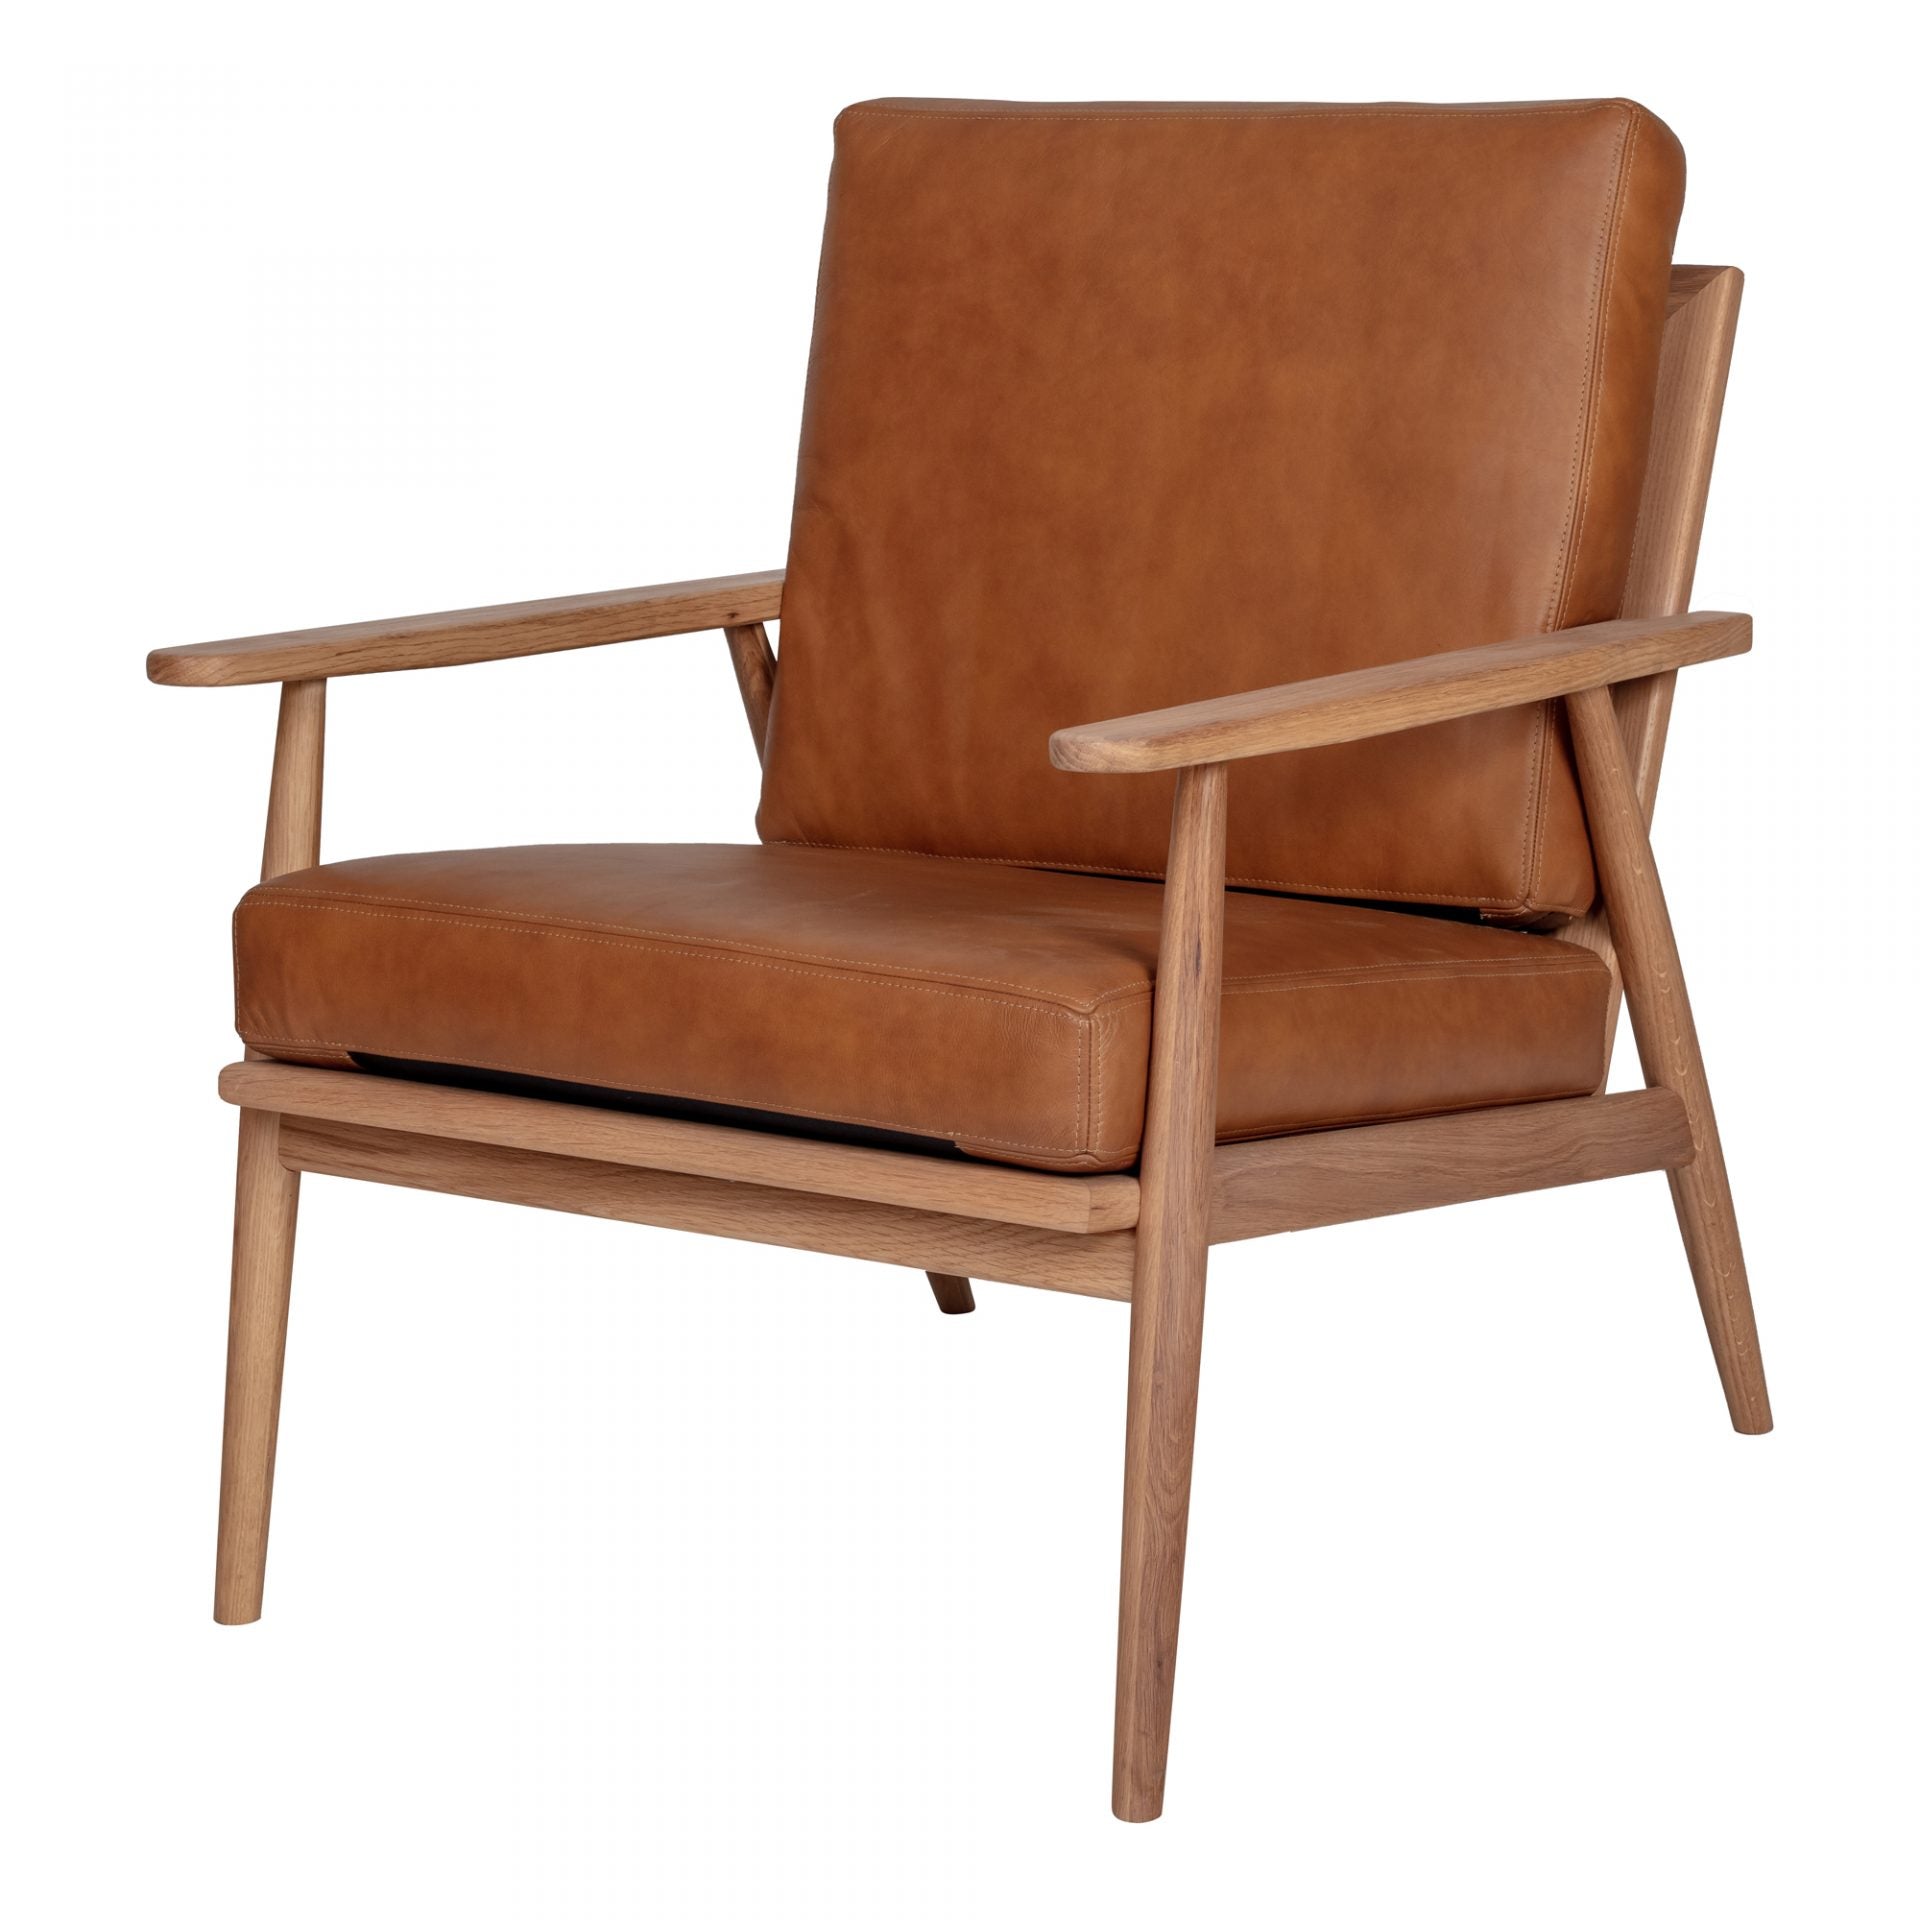 We love the contemporary look of this Harper Tan Leather Lounge Chair. The camel top grain leather elevates any living room, office, or lounge area.   Size:  26"W x 30.5"D x 28.5"H Seat Height: 18" Back Height: 19"  Materials: Upholstery - Top Grain Leather, Solid Oak,'